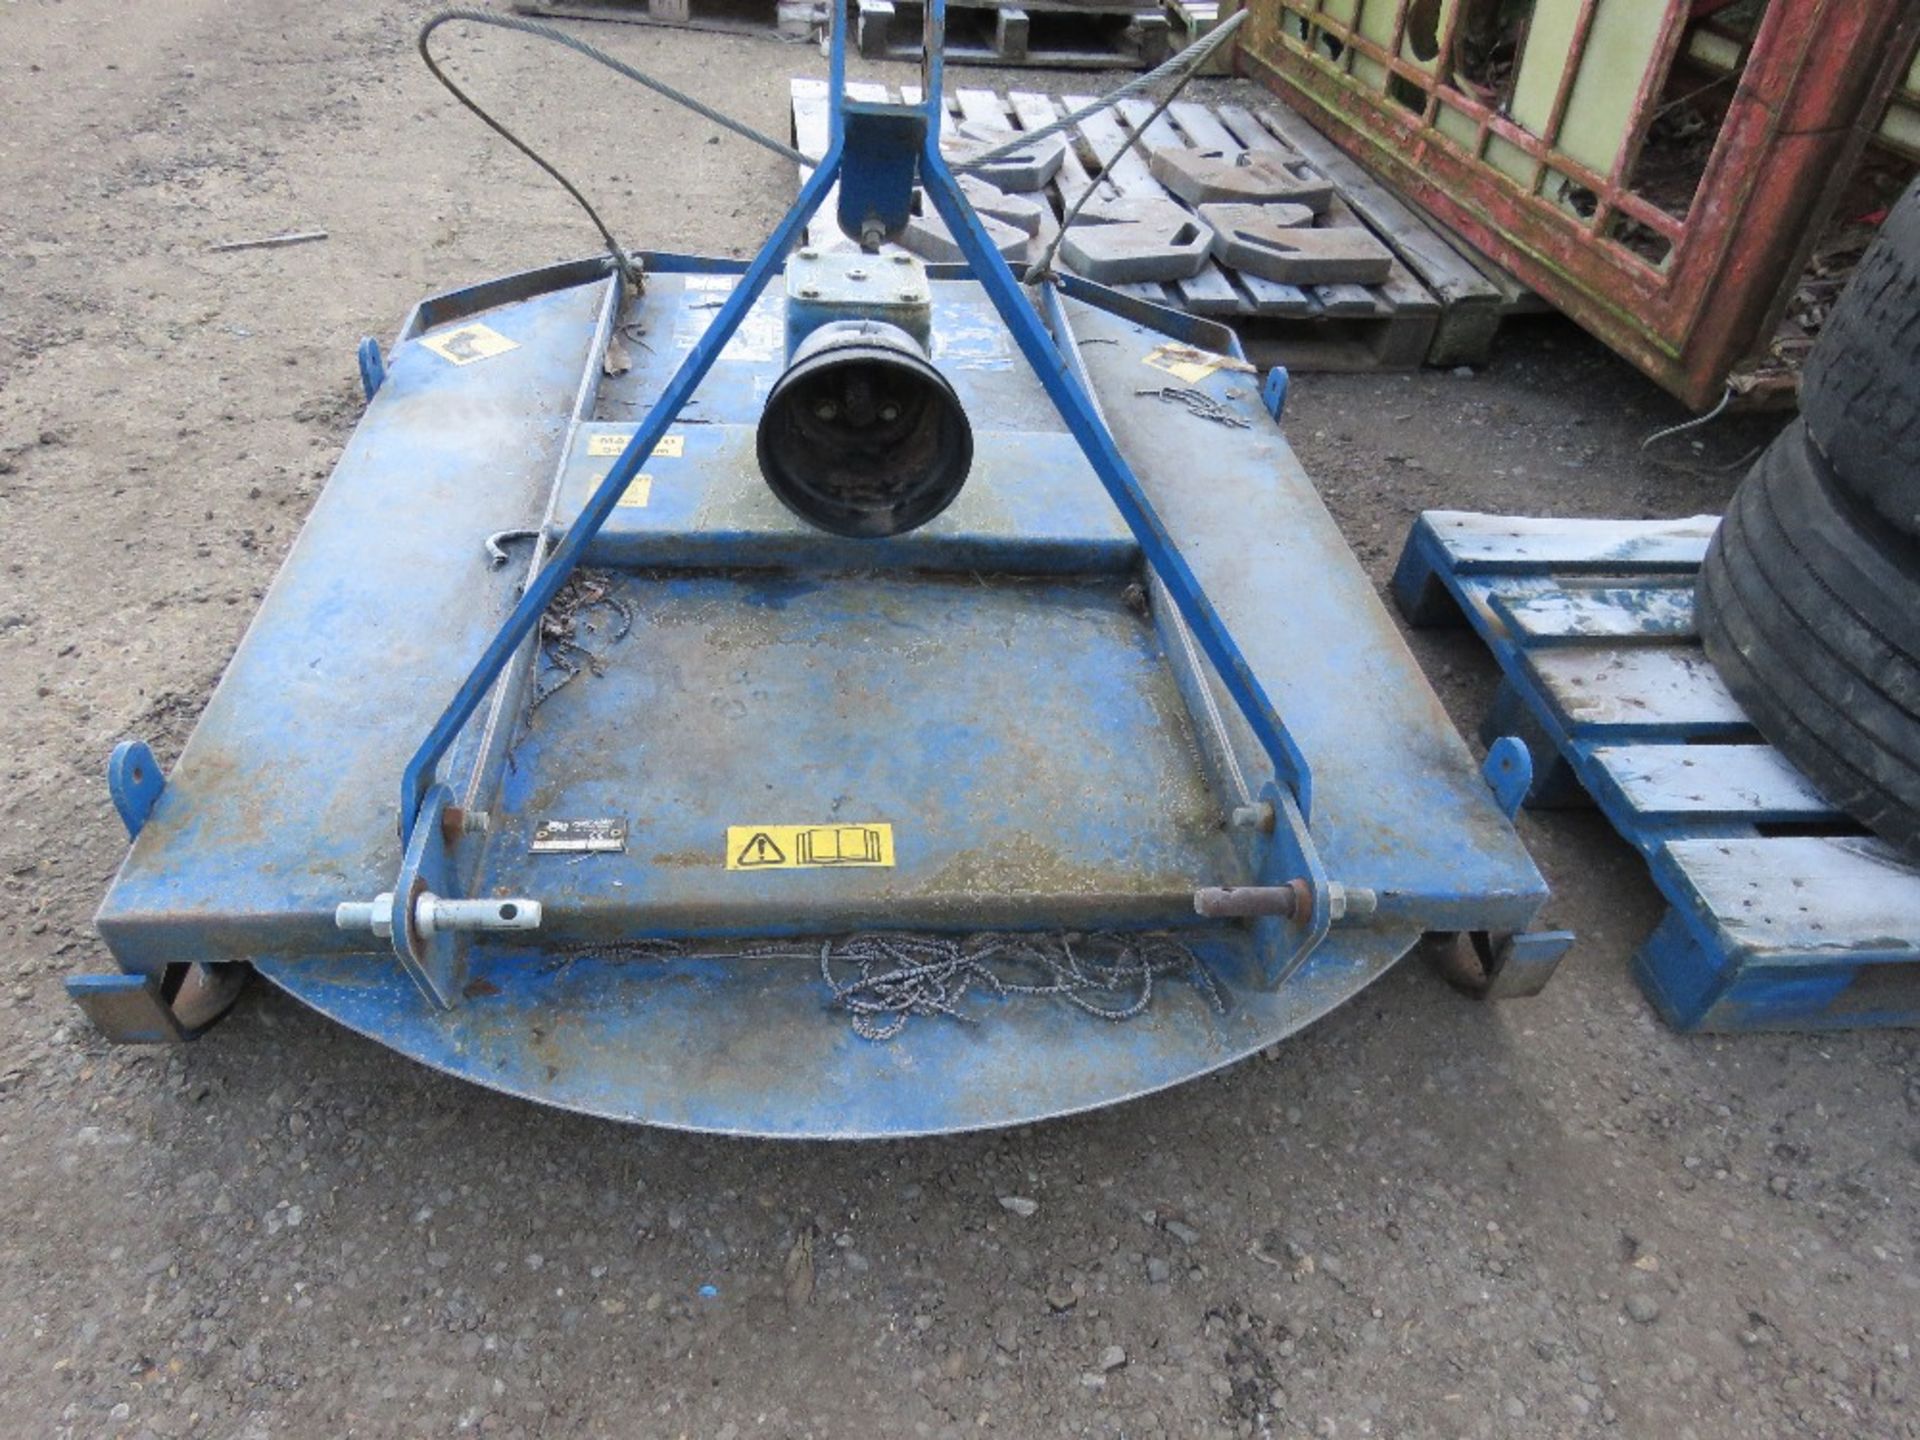 PORT AGRIC CUTLET 4FT WIDE TRACTOR TOPPER MOWER, REQUIRES PTO SHAFT. - Image 2 of 9